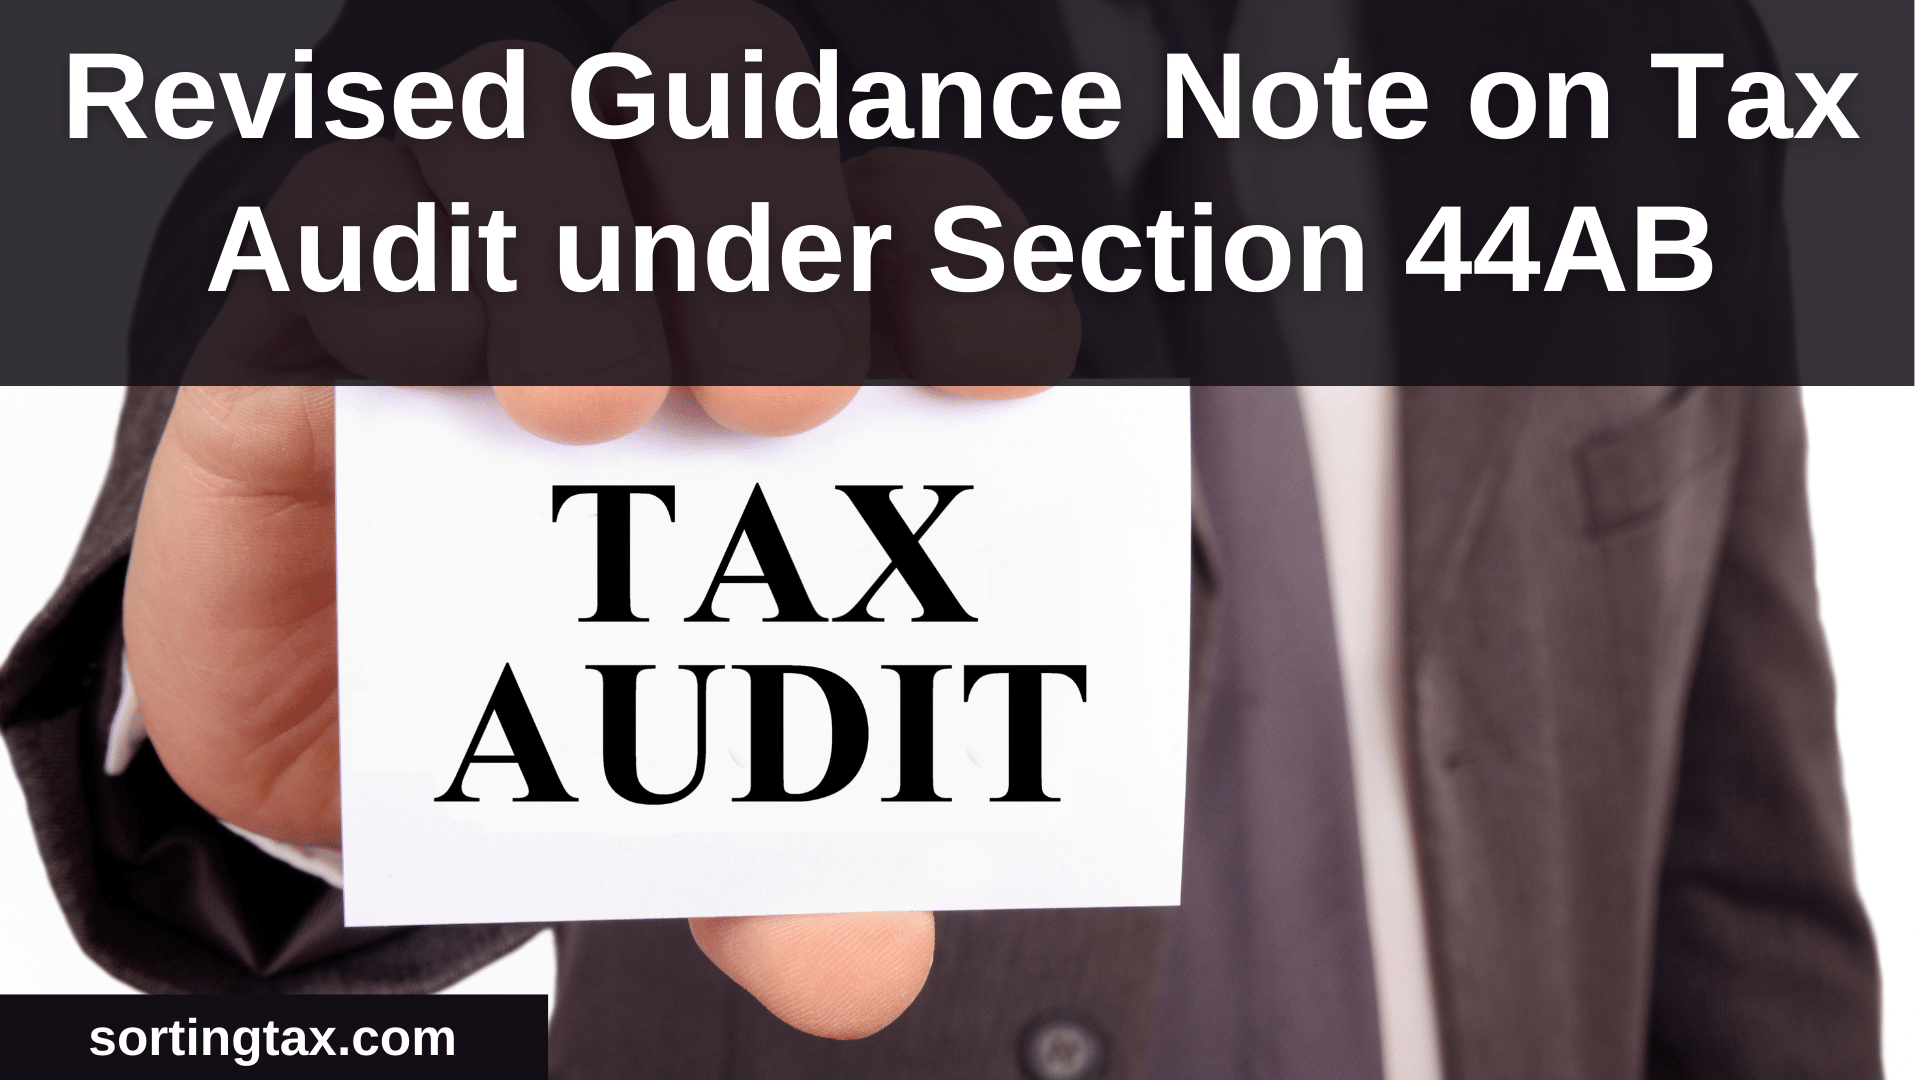 Revised Guidance Note on Tax Audit under Section 44AB